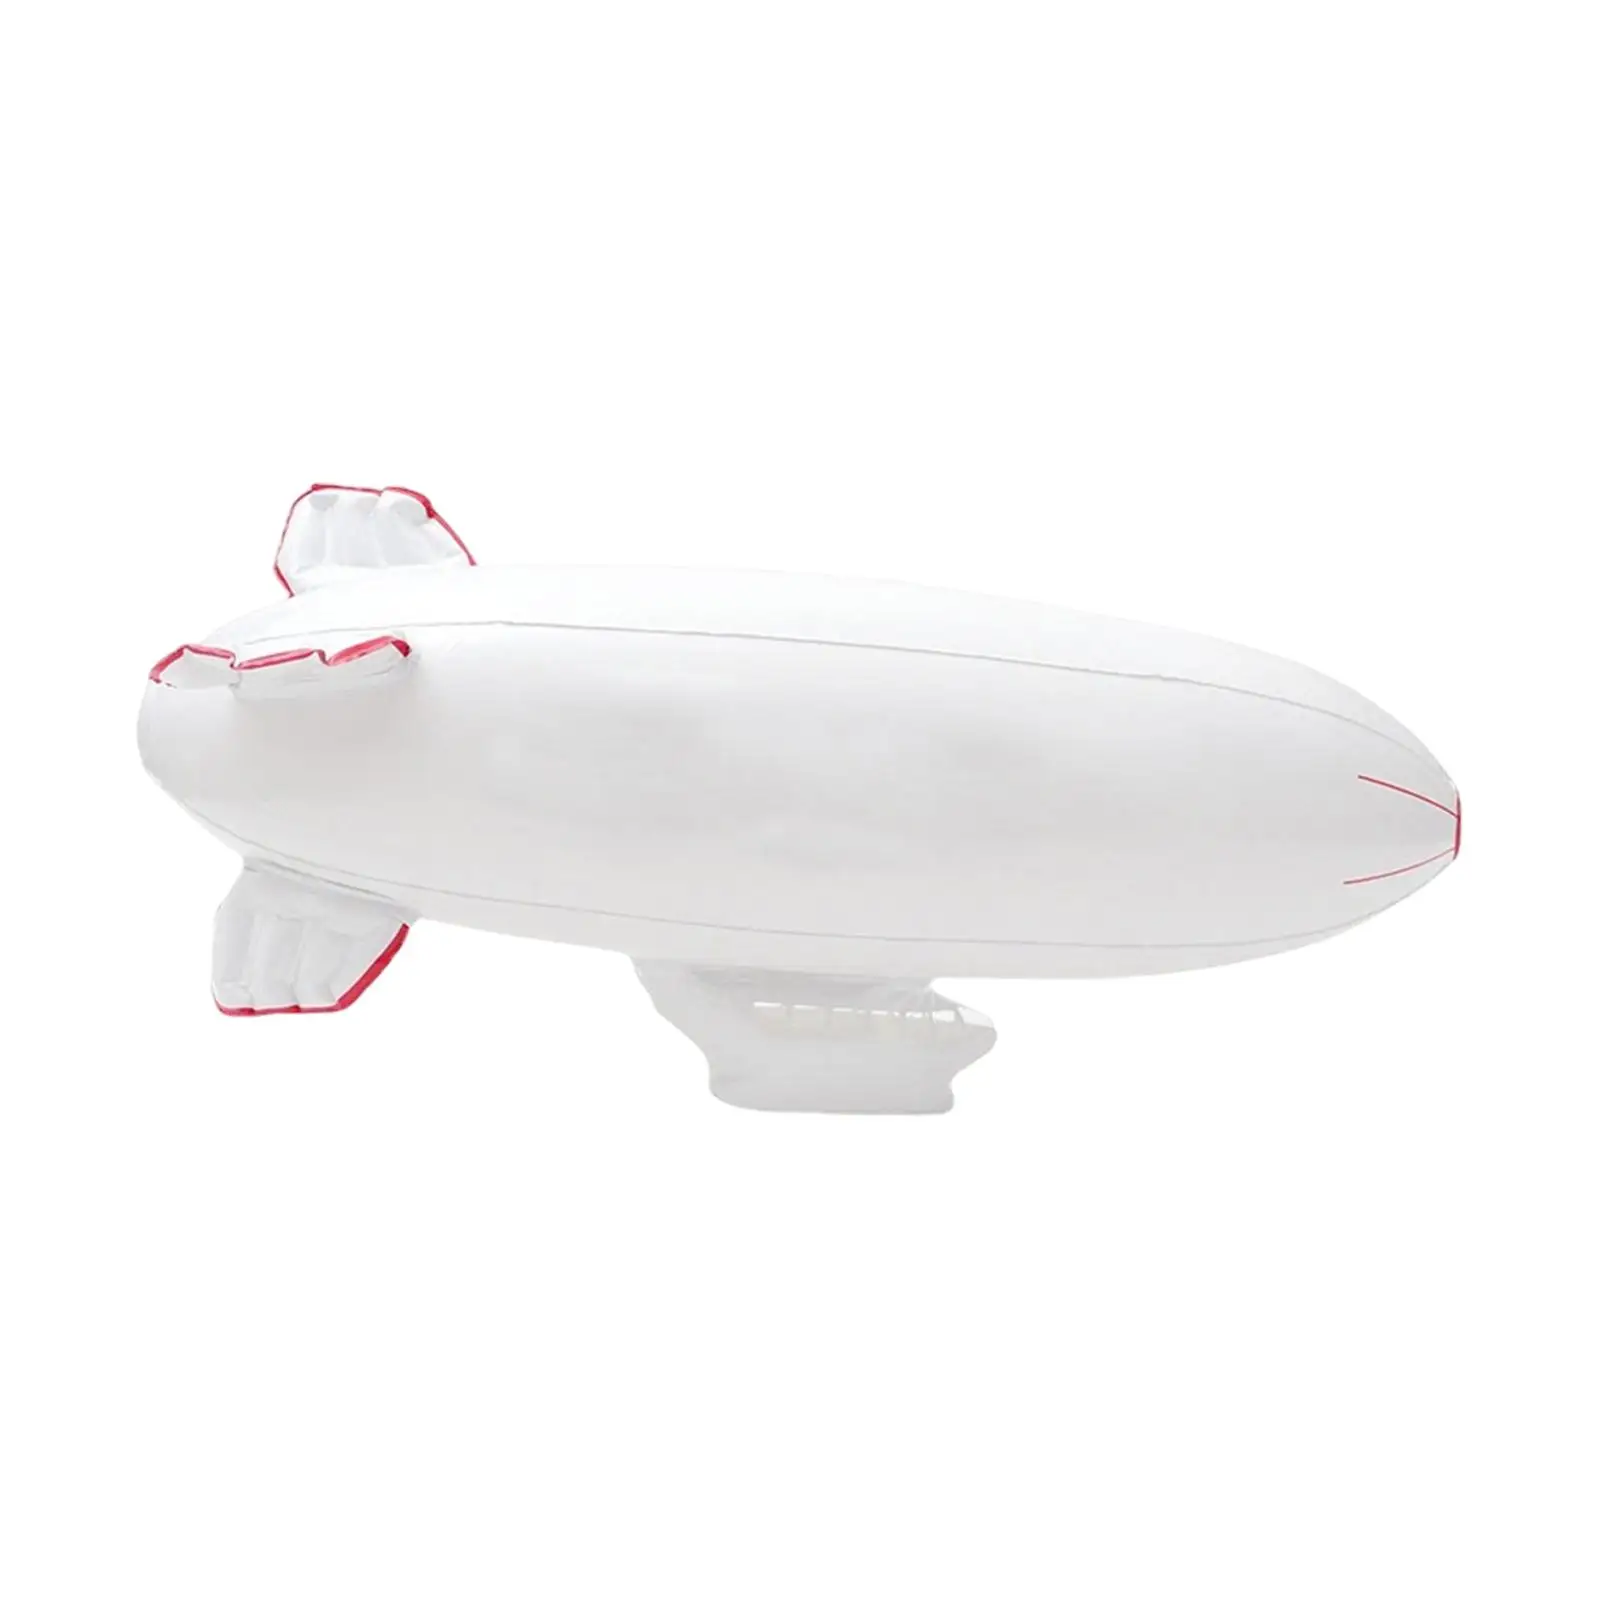 Nflatable Toy Small Size Refillable Airplane Model for Party Birthday Decor